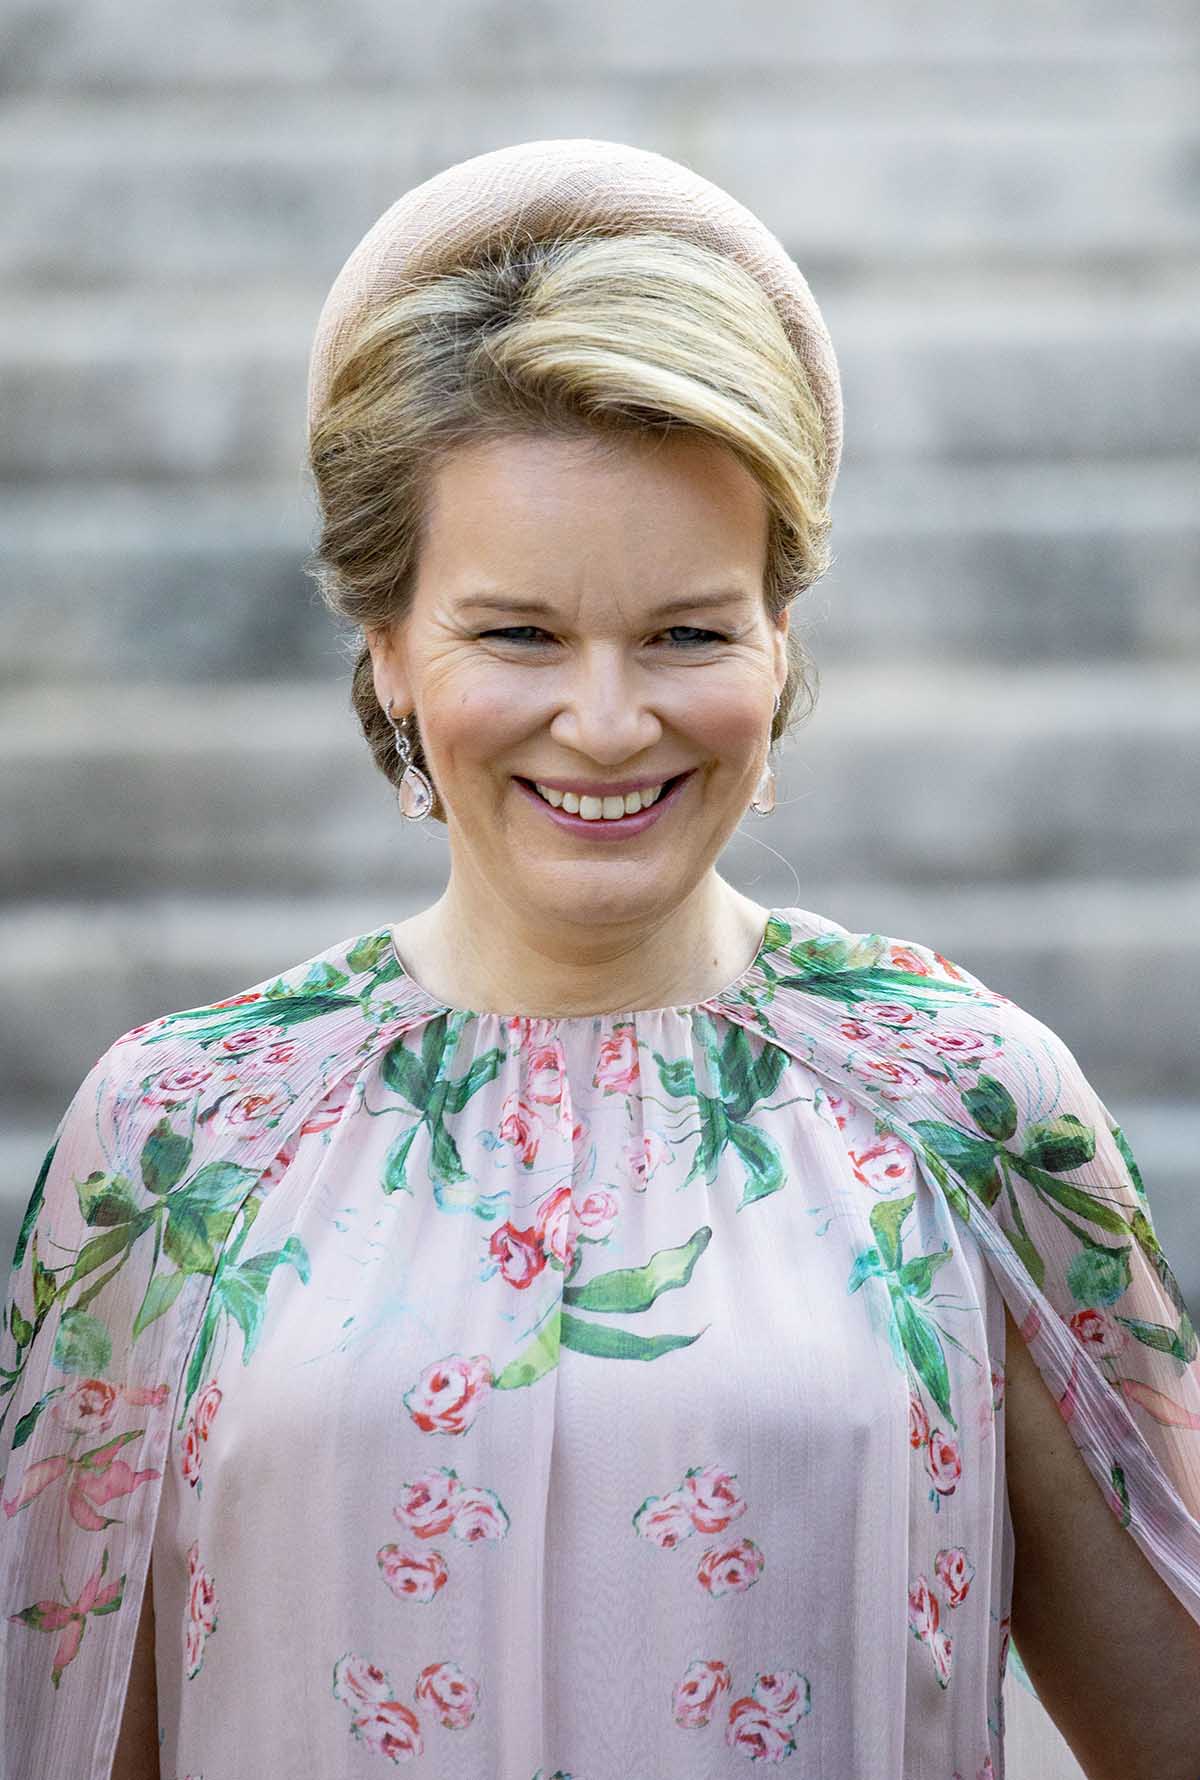 Queen Mathilde of Belgium attending the Te Deum on the occasion of the National Day of Belgium in Brussel, on July 21, 2021